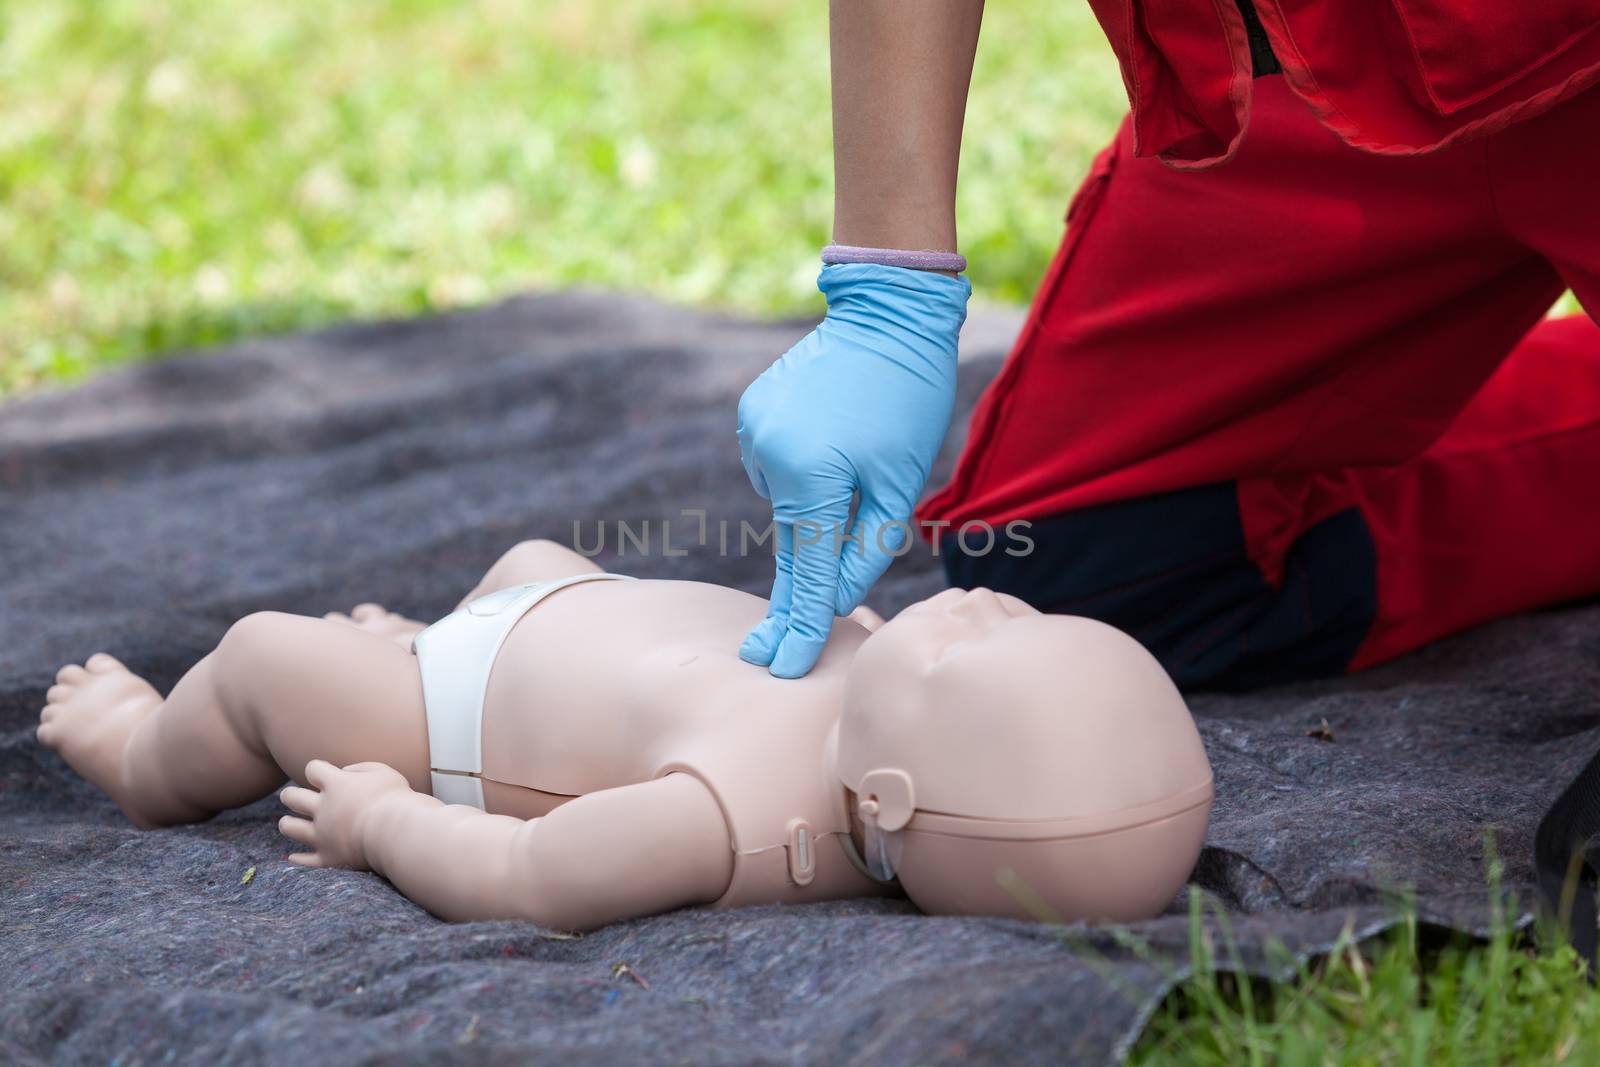 Infant CPR dummy first aid by wellphoto